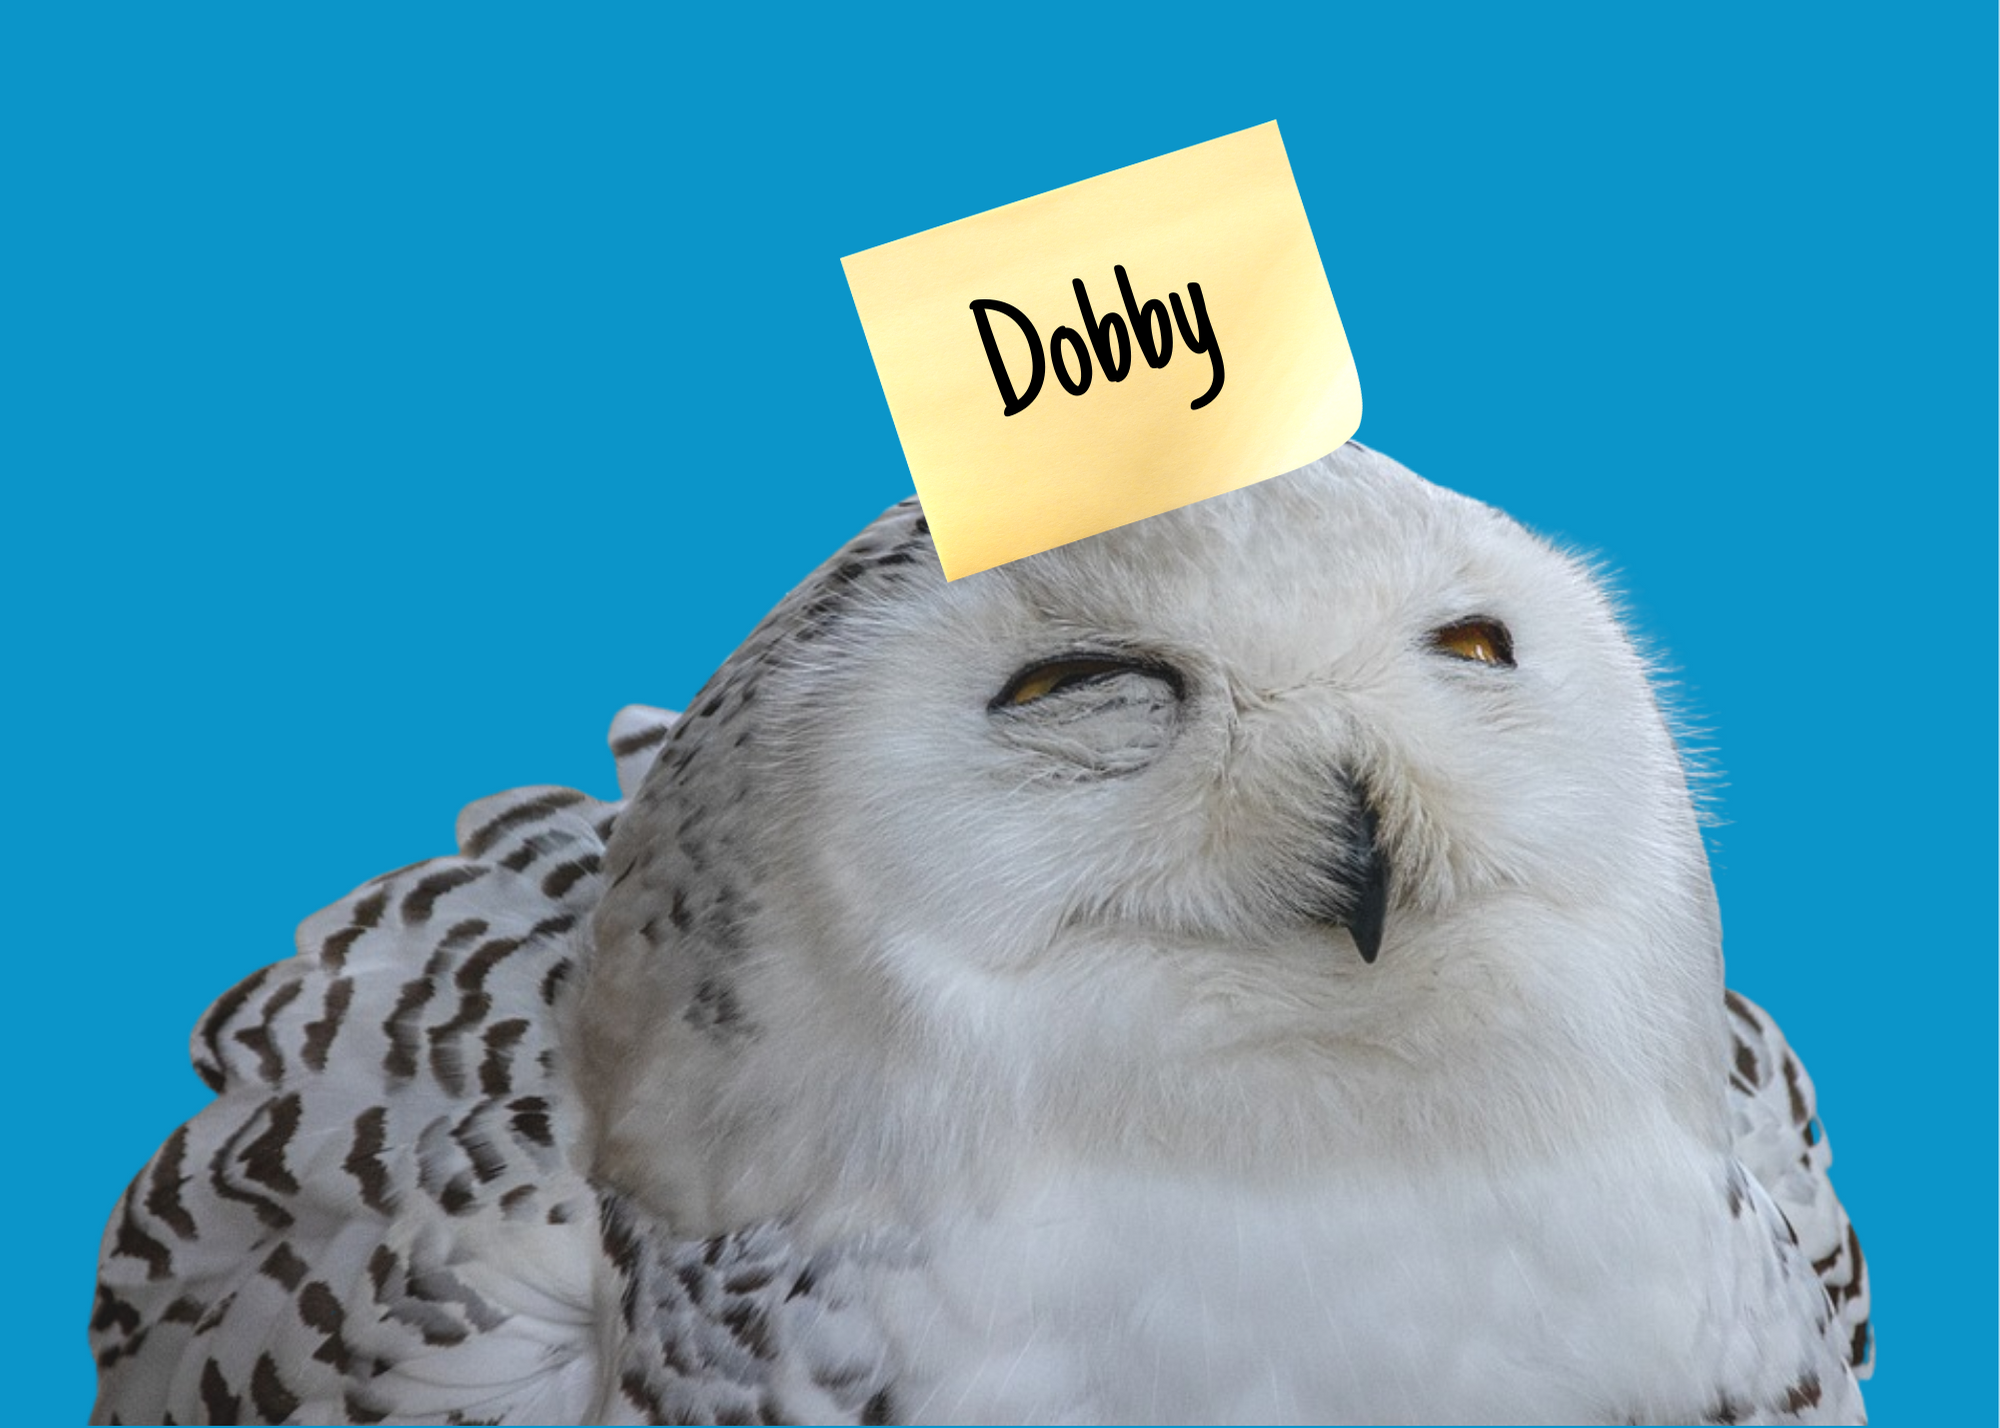 A snowy owl squinting like it is thinking hard with a post it note with "Dobby" on its forehead.